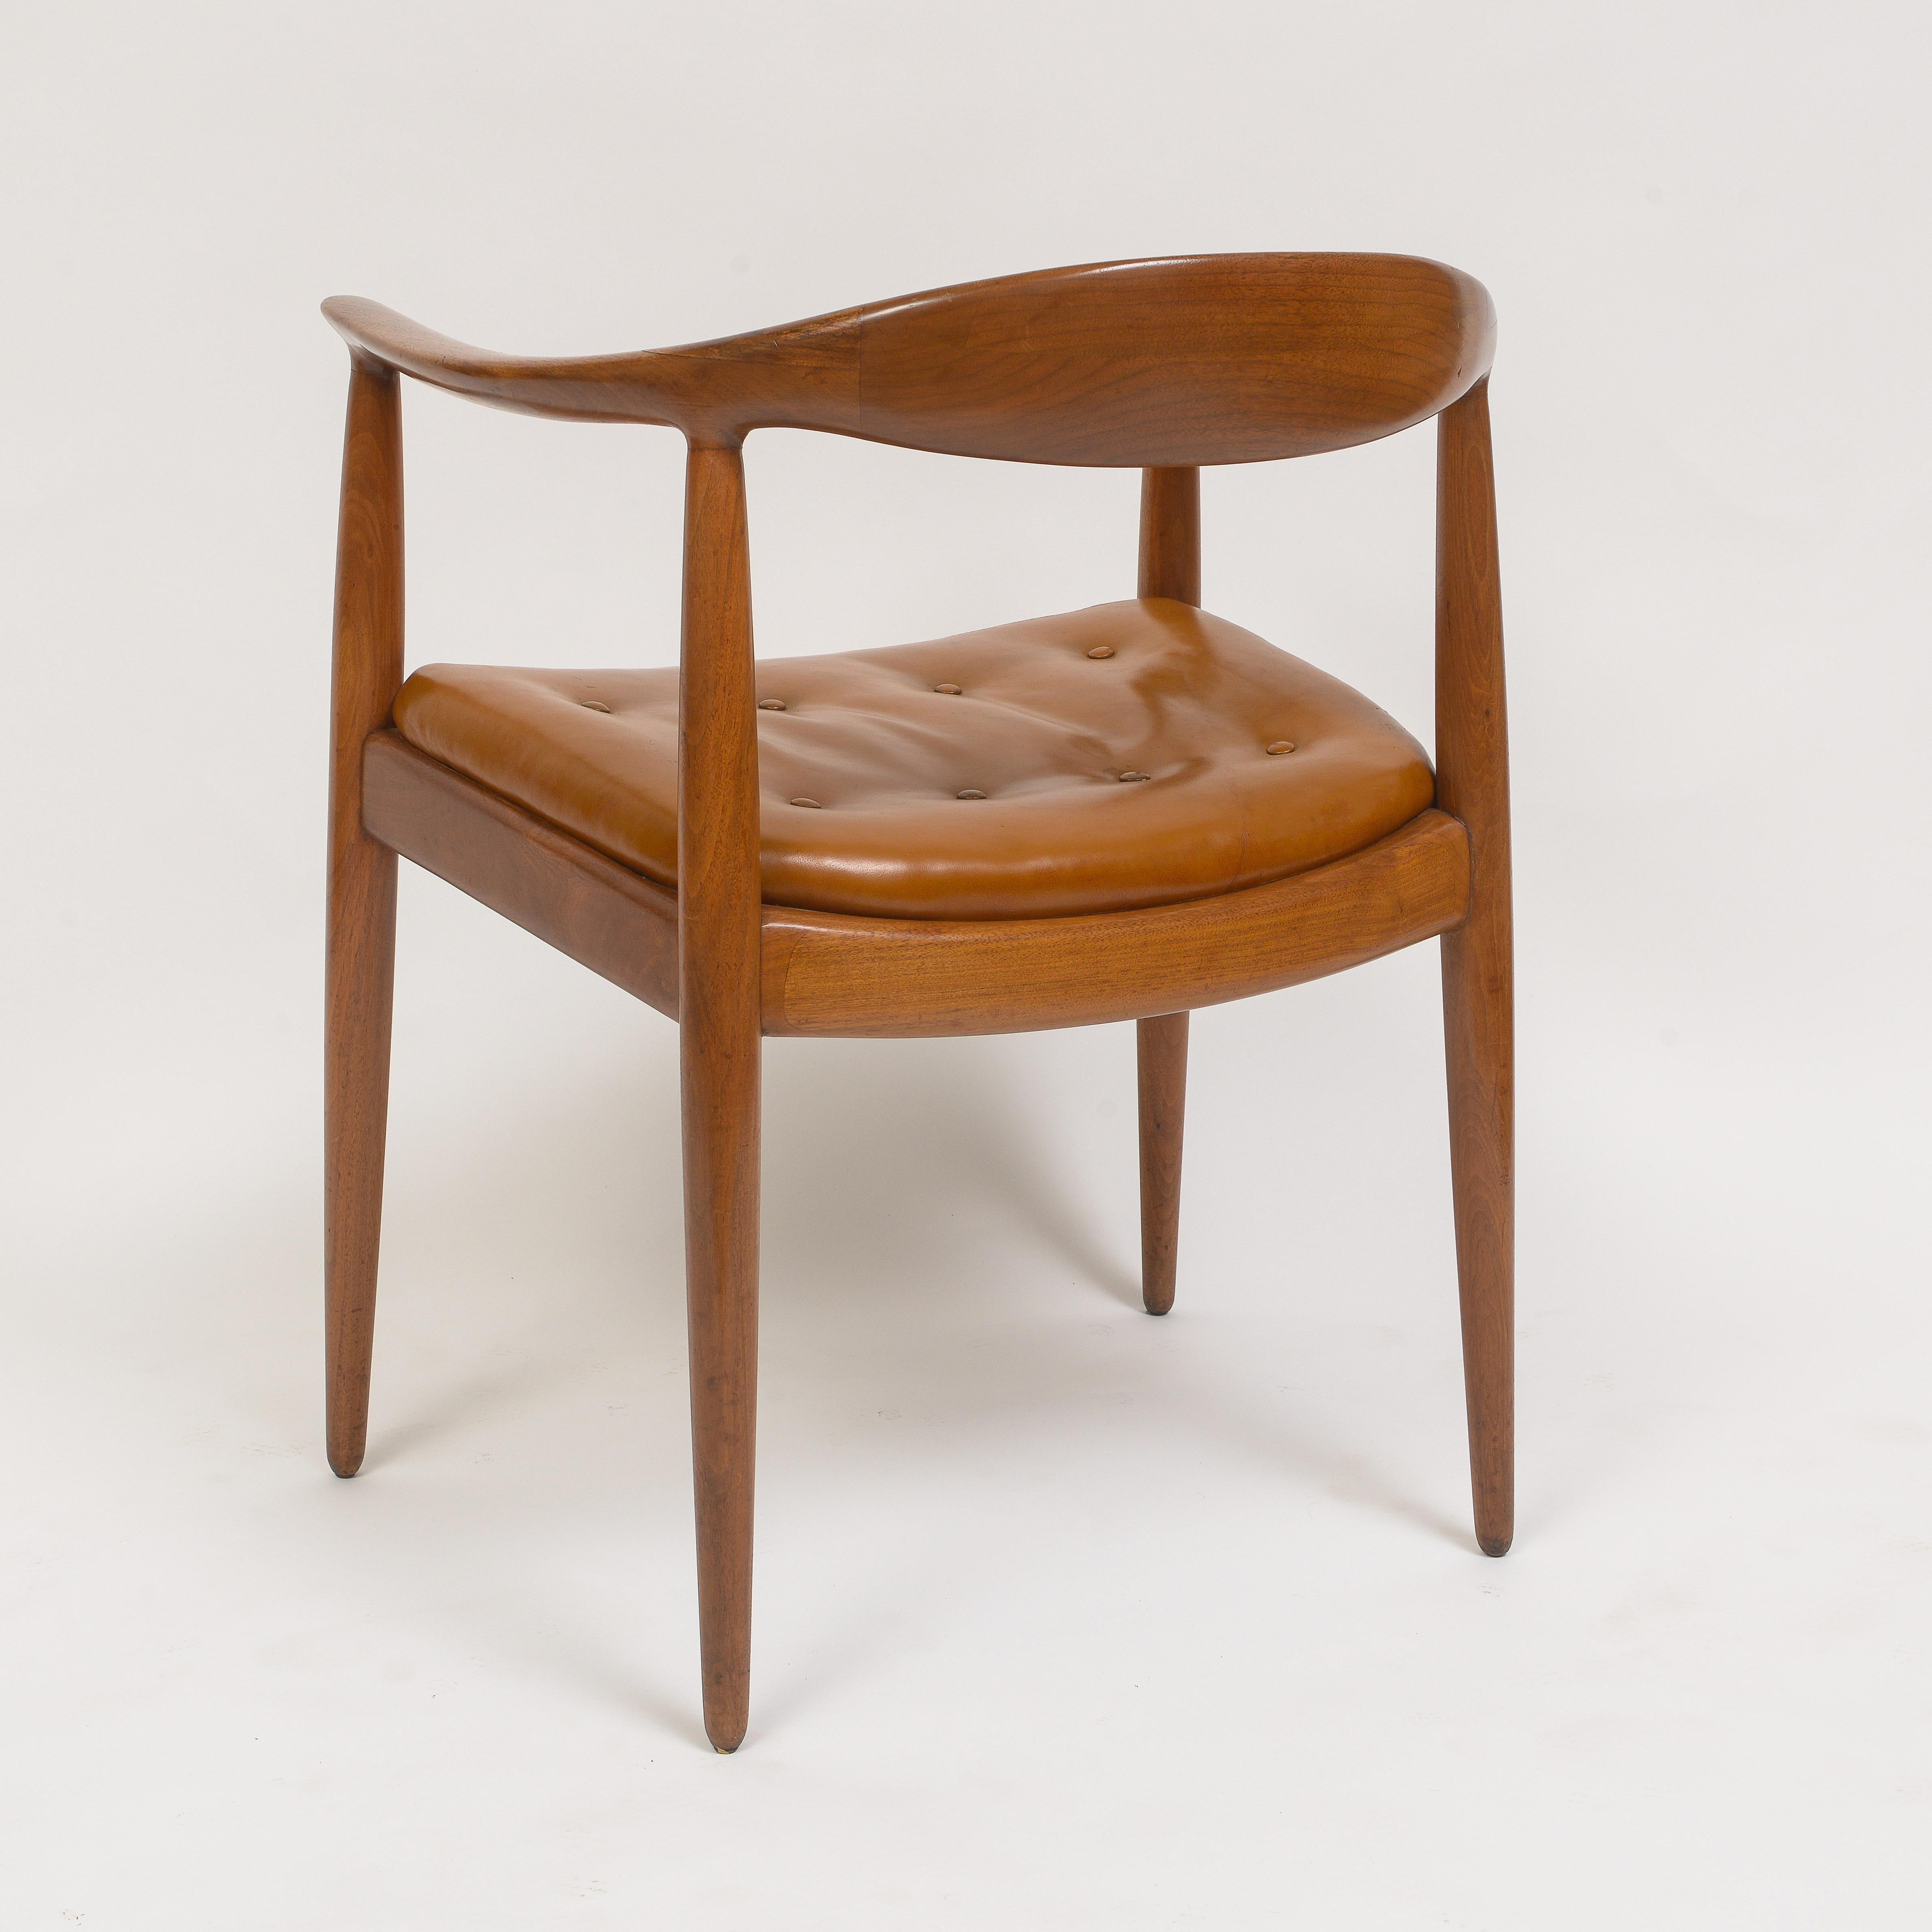 Hand-Crafted Contemporary 1960s Style Danish Modern Armchair For Sale